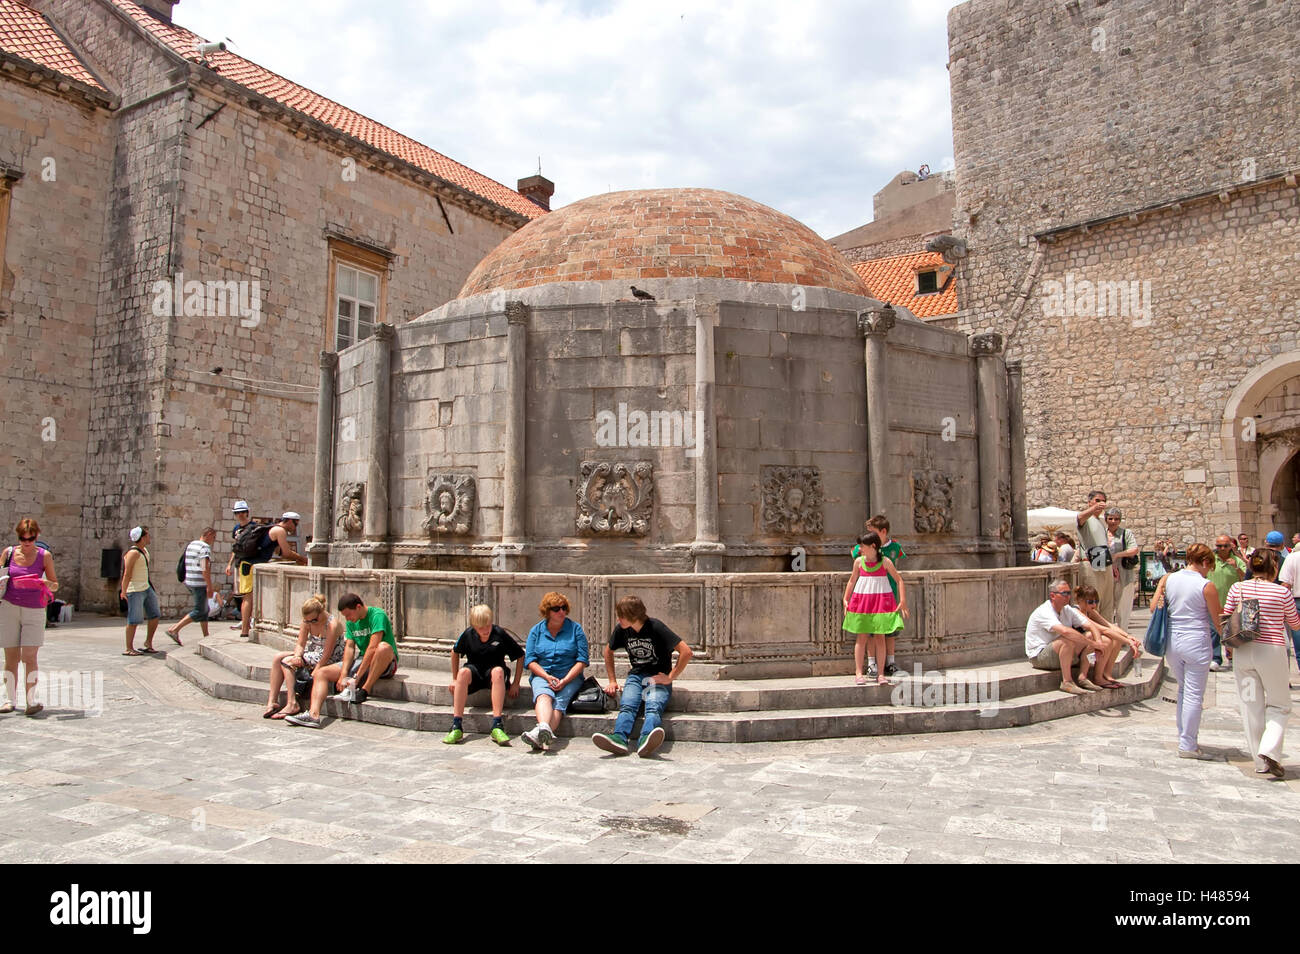 DUBROVNIK, CROATIA - JUNE 28, 2010: Unidentified tourists near the Big Fountain of Onofrio, one of the old town landmarks Stock Photo